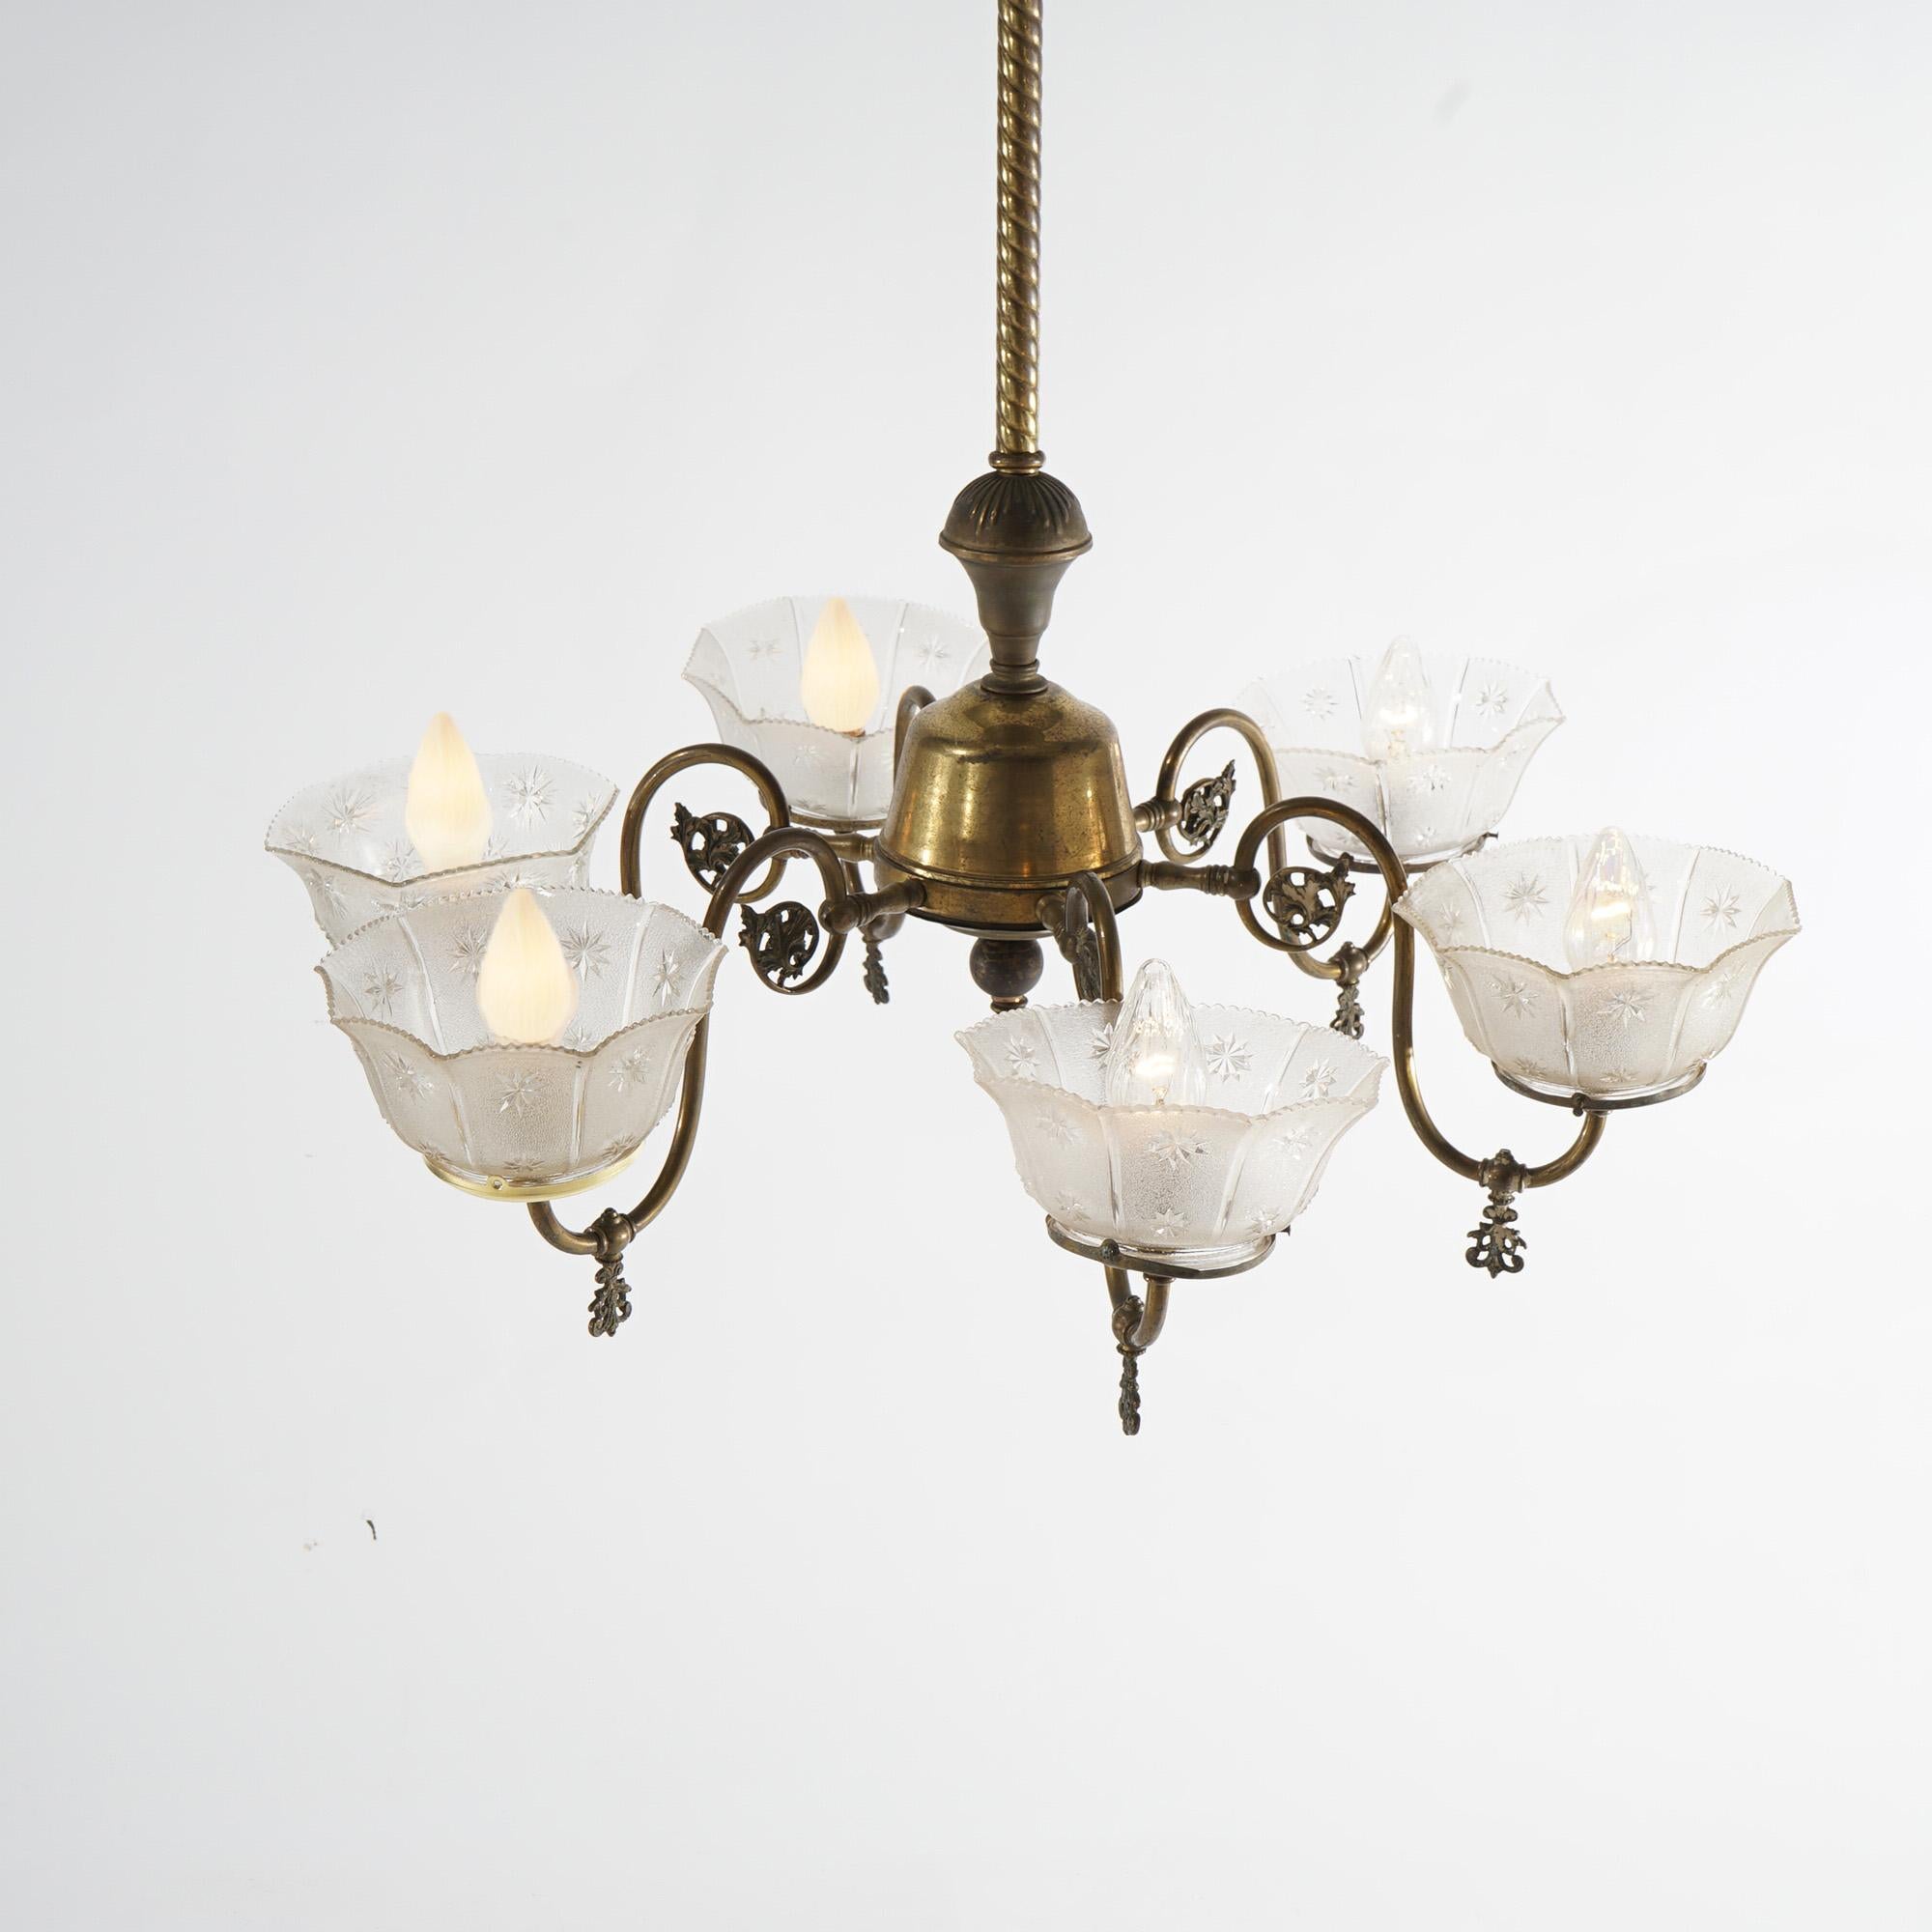 American Antique Six Arm Brass Gas Chandelier with Glass Shades, Electrified, Circa 1890